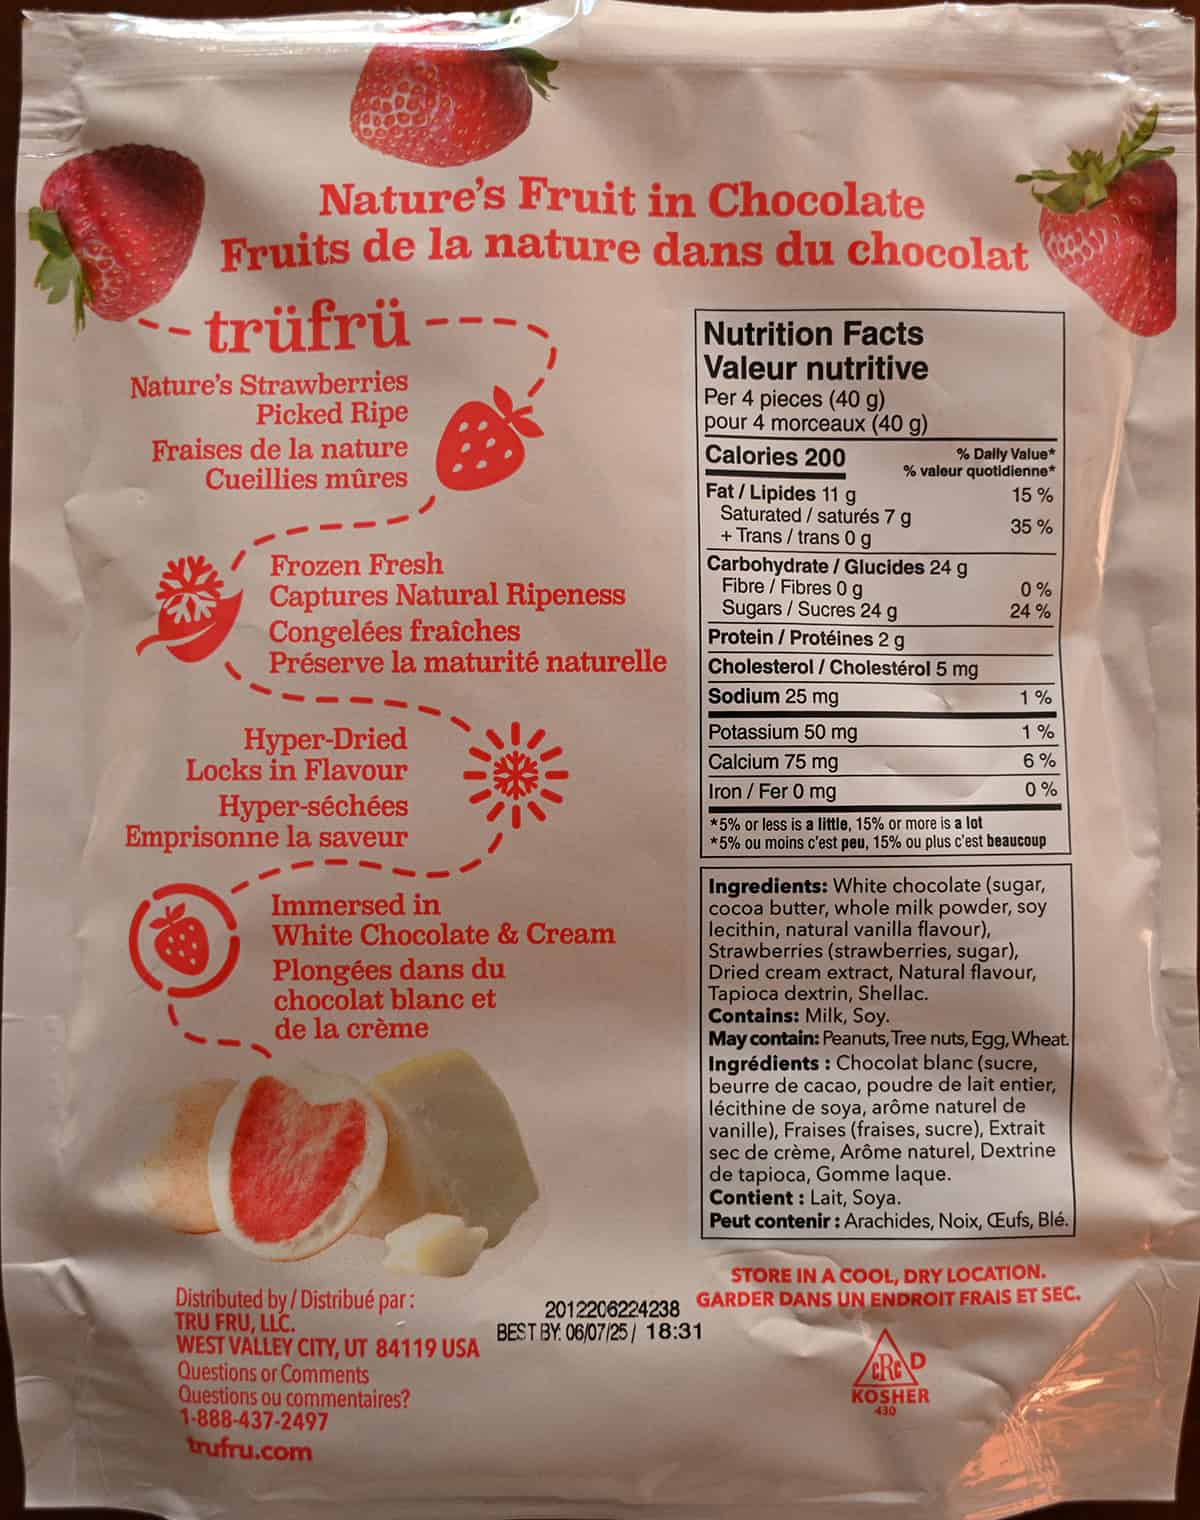 Image of the back of the bag of the white chocolate & cream covered strawberries.